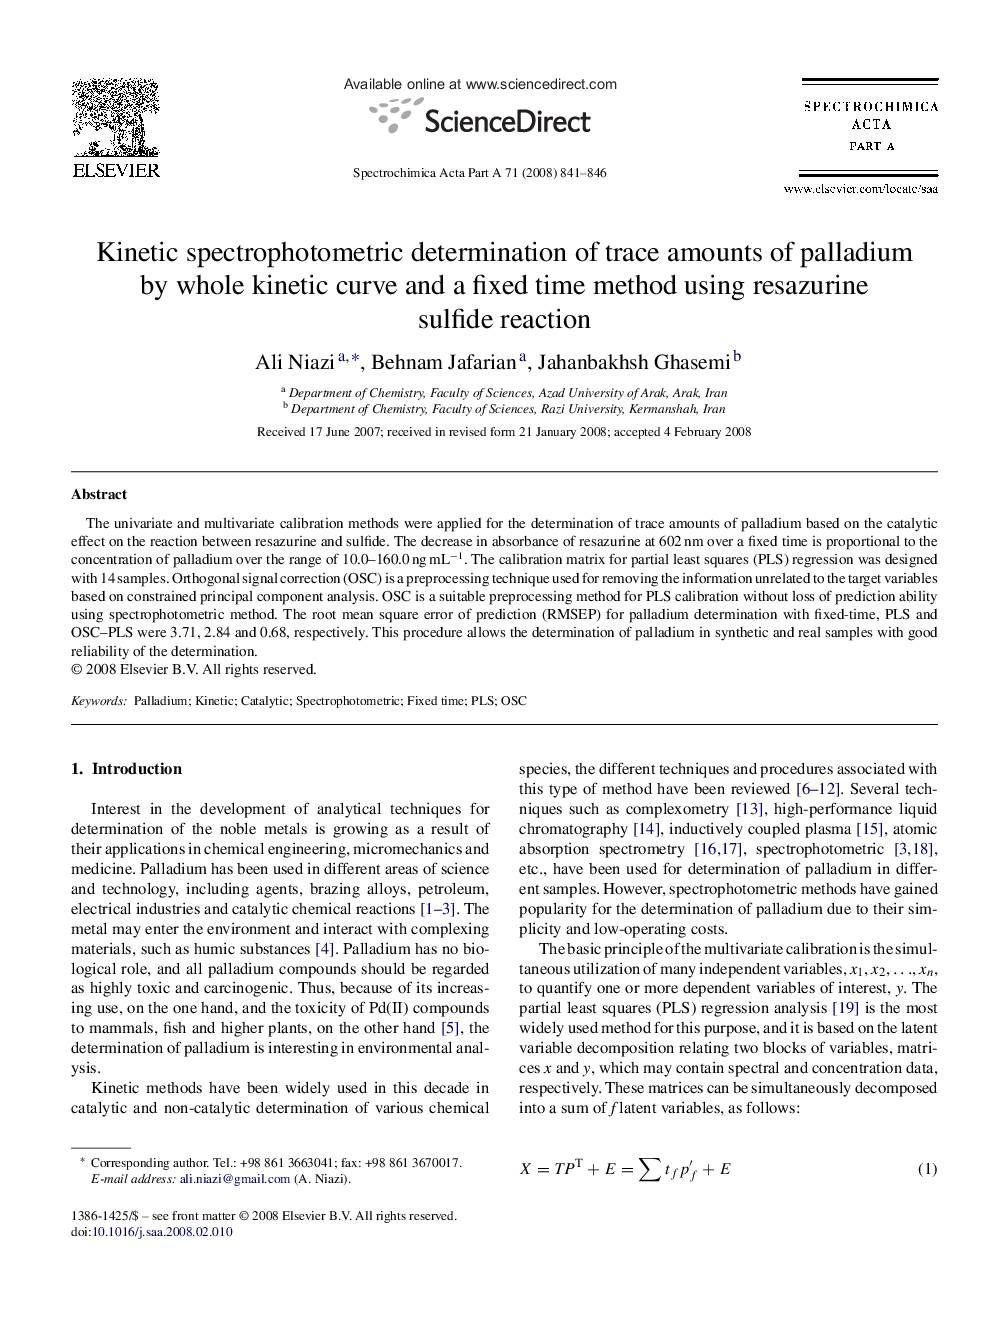 Kinetic spectrophotometric determination of trace amounts of palladium by whole kinetic curve and a fixed time method using resazurine sulfide reaction